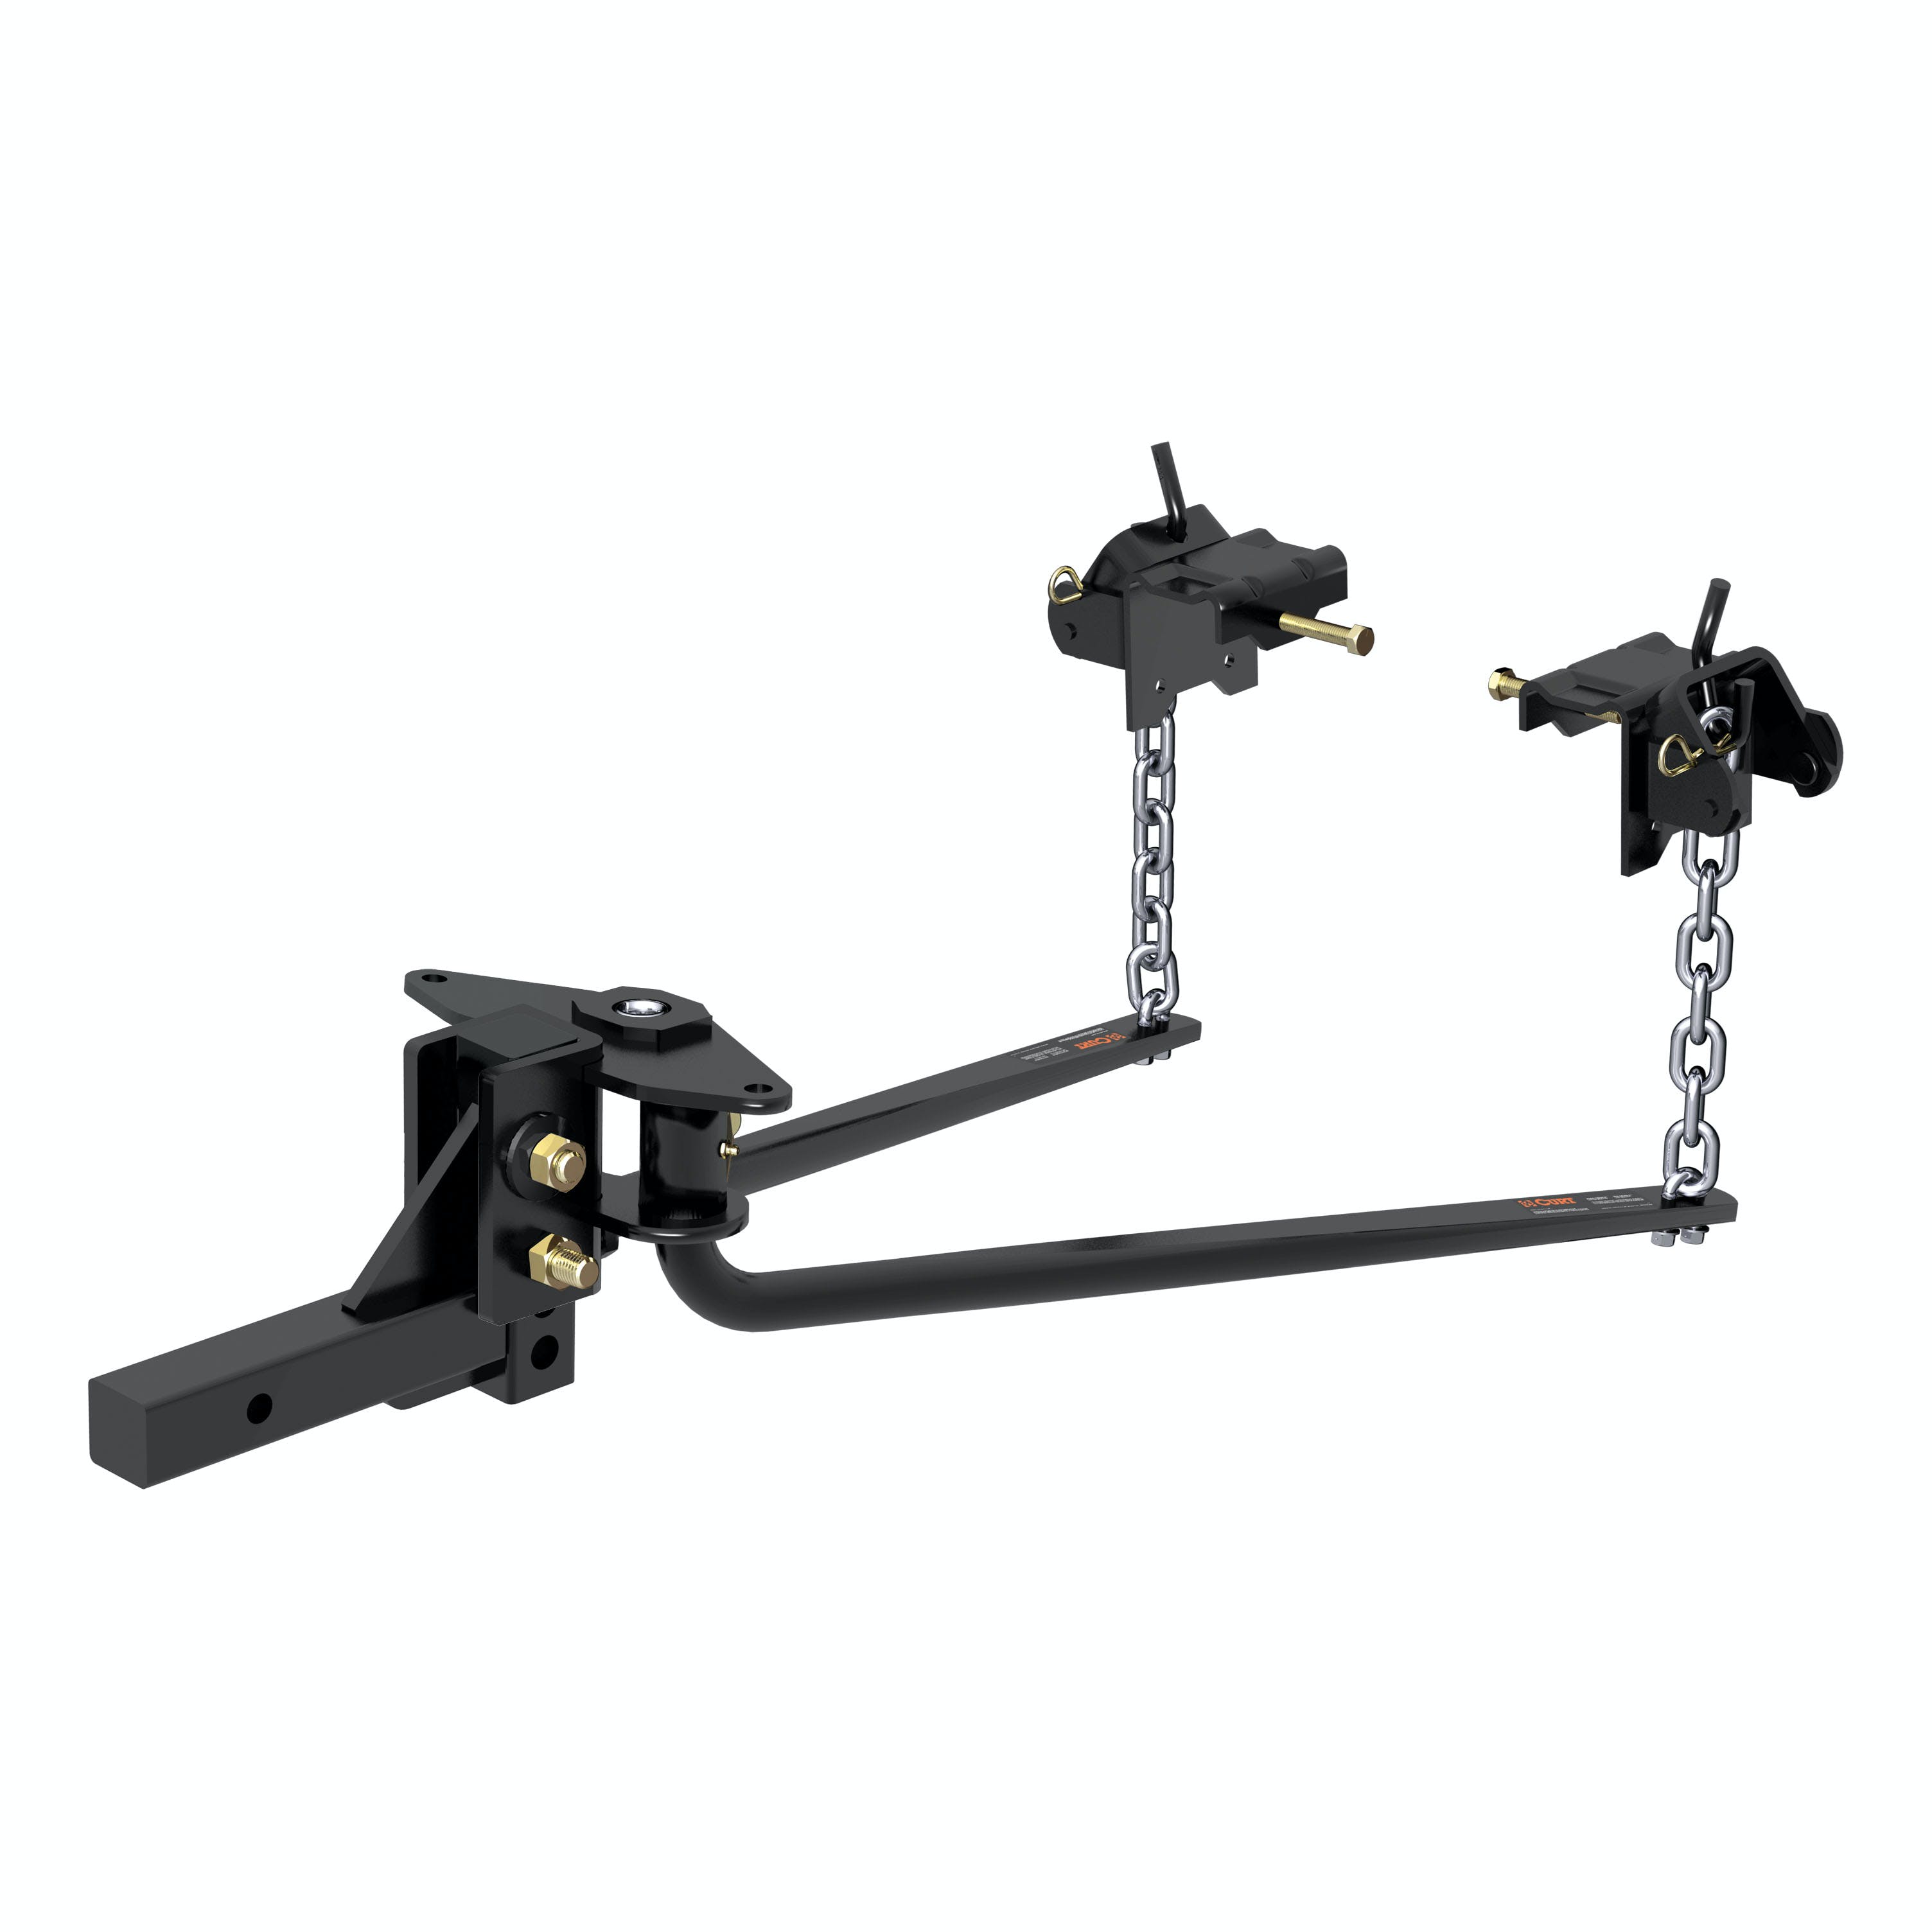 CURT 17050 Round Bar Weight Distribution Hitch with Integrated Lubrication (5-6K)